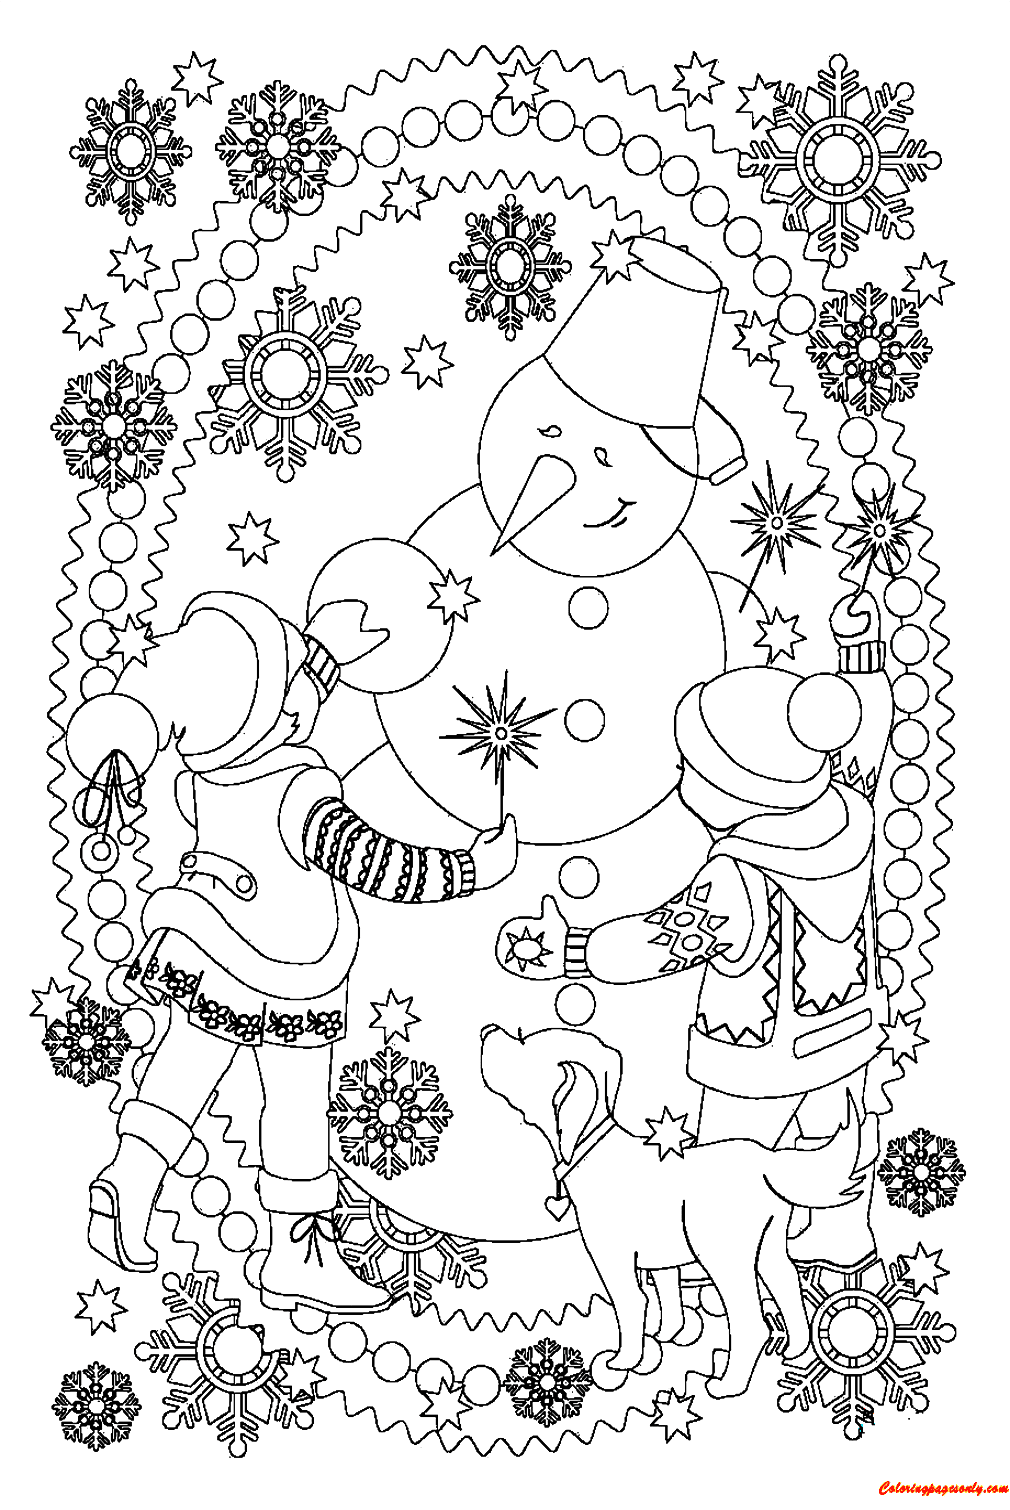 Playing With Snowman Coloring Page